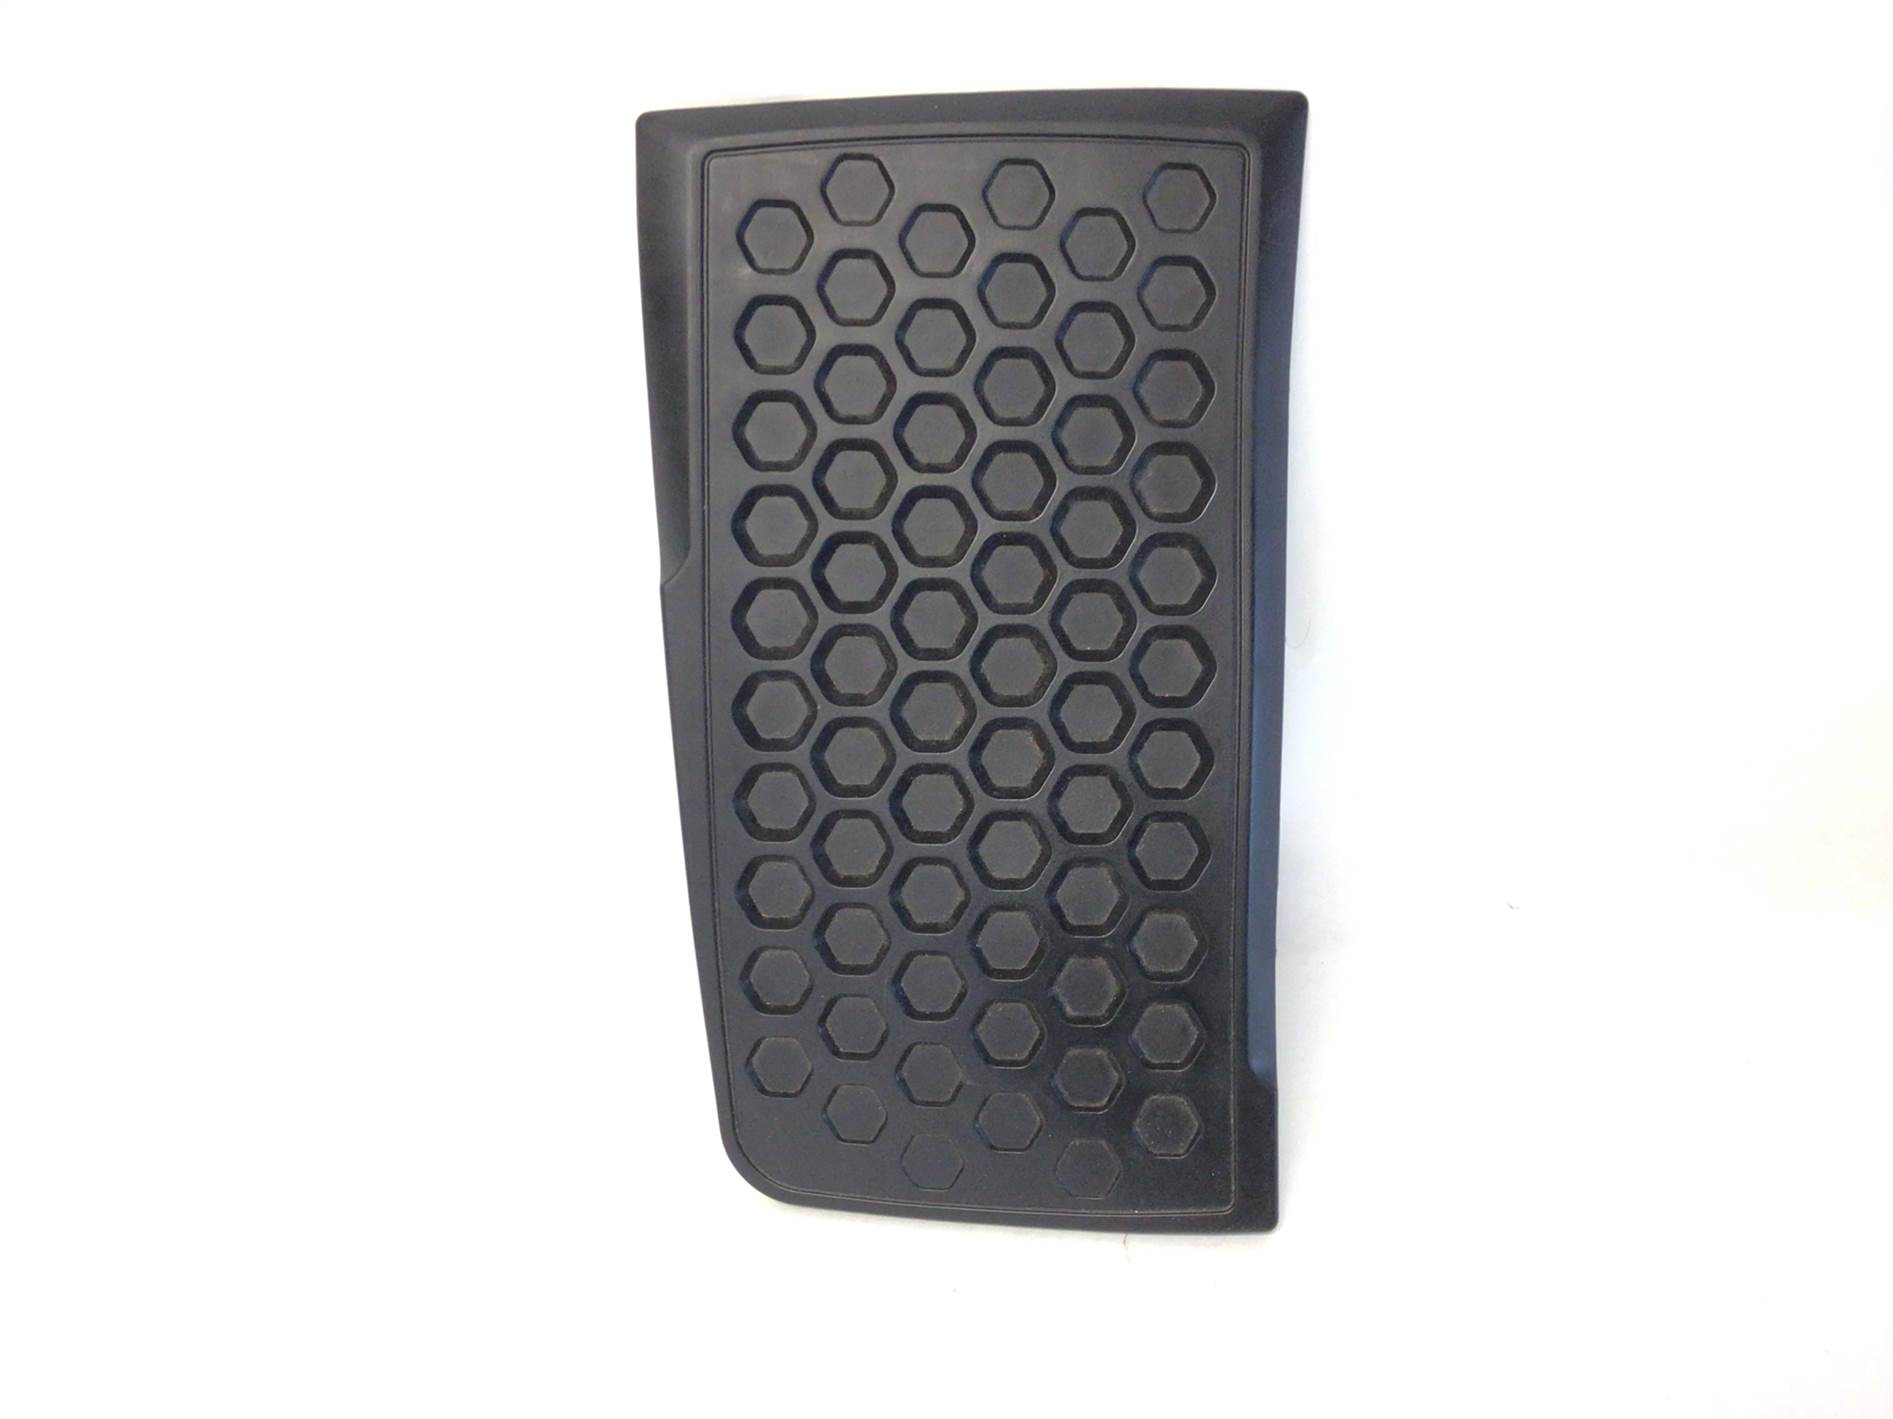 Right Foot Pad - Rubber Insert (Used)